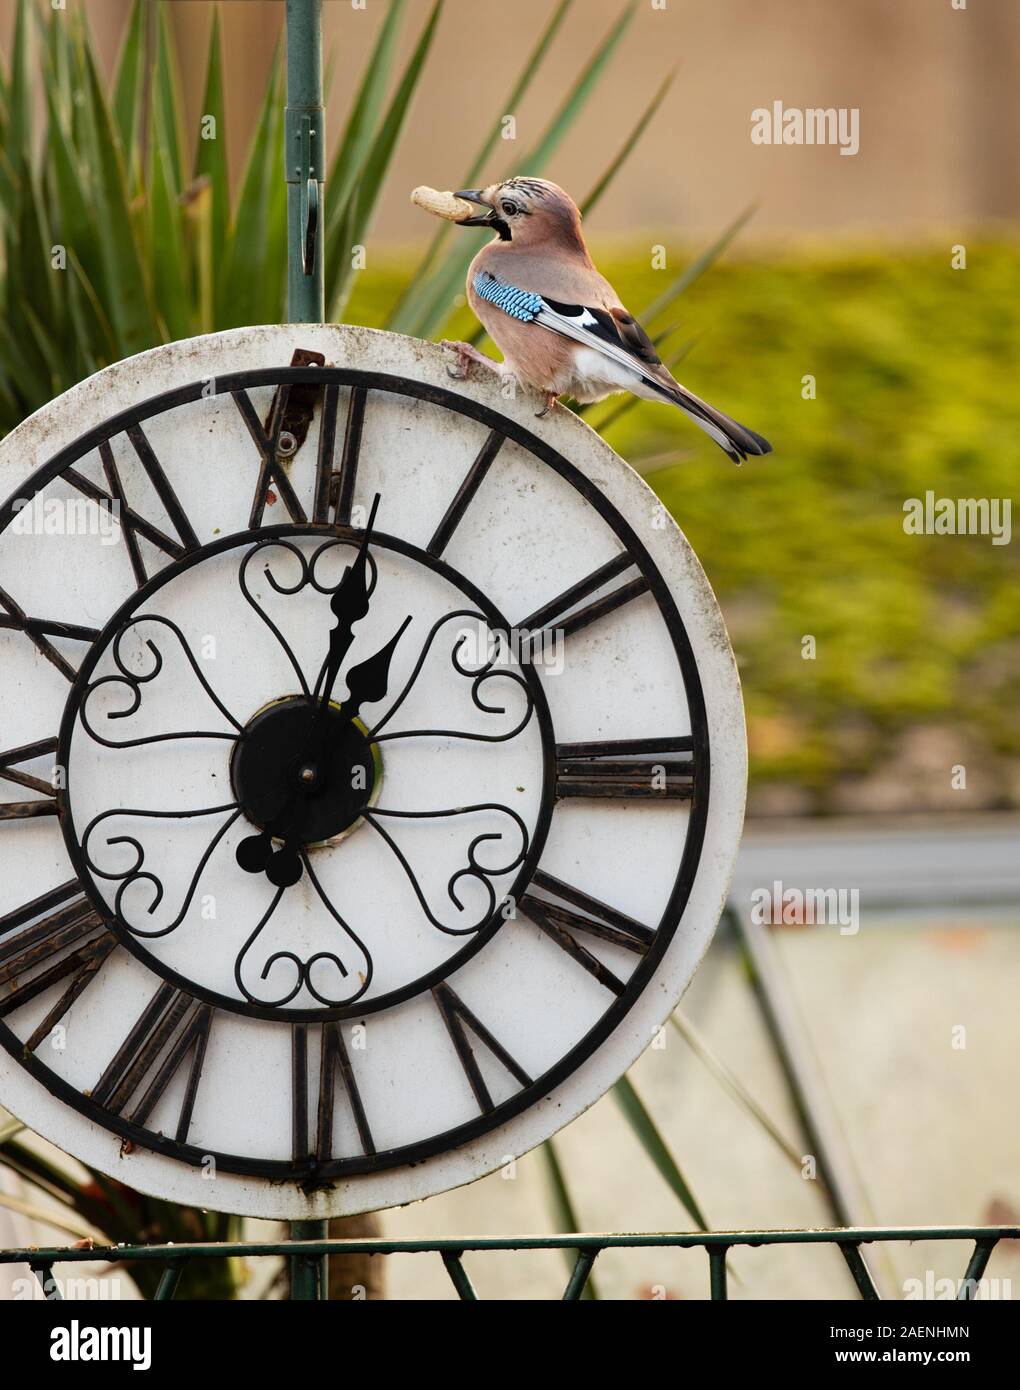 Munch time, lunch time, Jay bird feeding on monkey nut perched on clock face with Roman numerals in UK garden. unsharpened Stock Photo